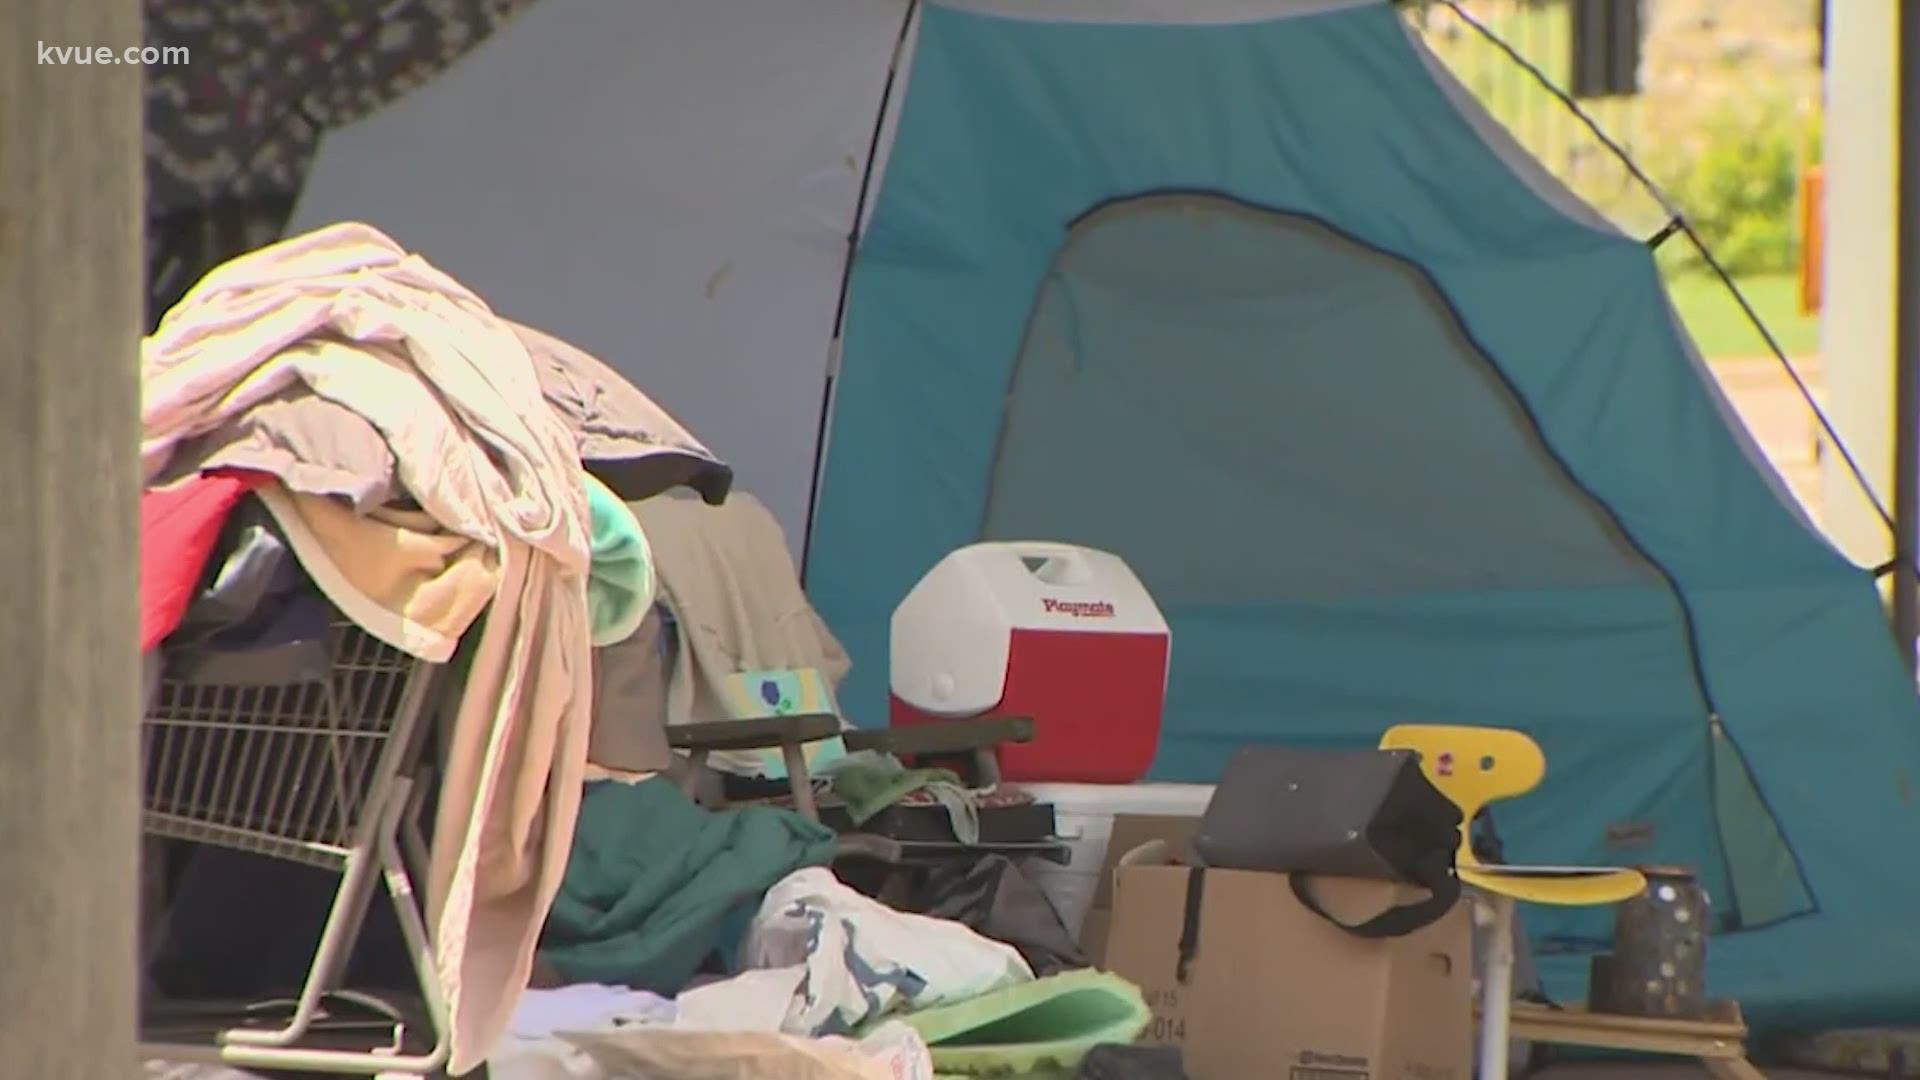 A nonprofit that works with the homeless community said there is no evidence the pandemic has increased homelessness in Austin – but it may look like it has.